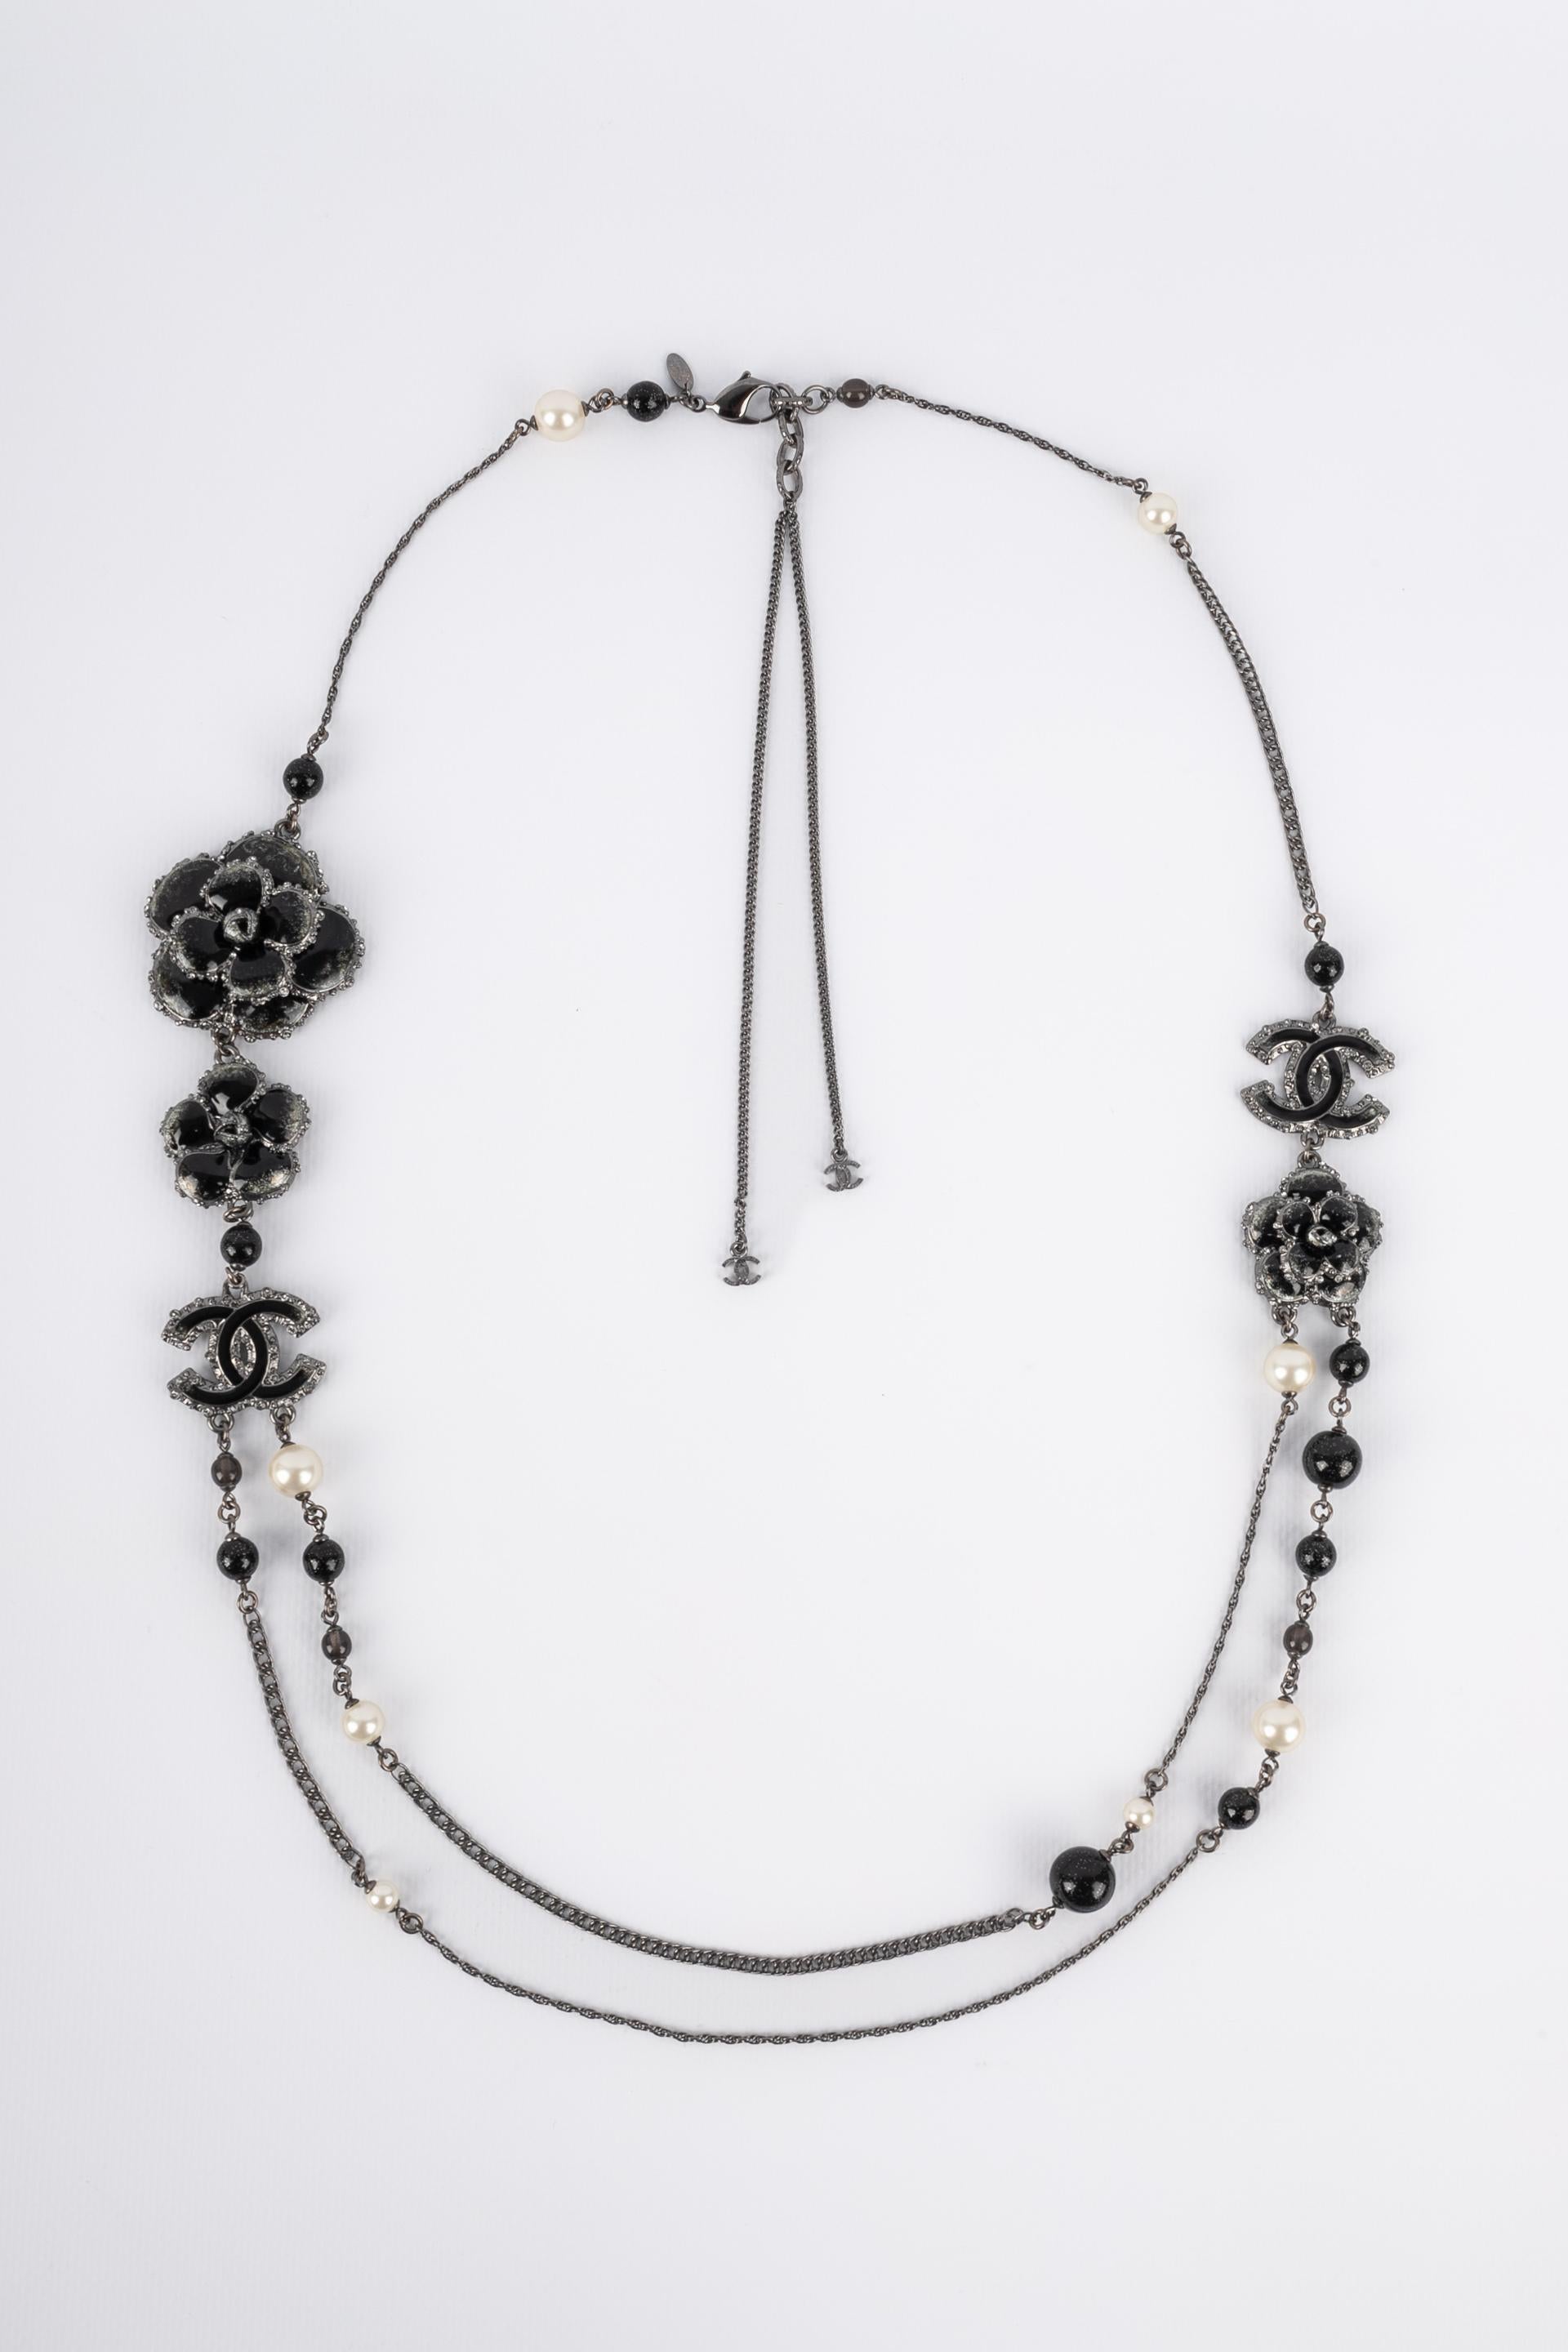 CHANEL - (Made in France) Dark-silvery metal long necklace with costume pearls, black glass pearls, camellias, and enameled cc logos. 2013 Collection.

Condition:
Very good condition

Dimensions:
Length: from 87 cm to 91 cm

CB99